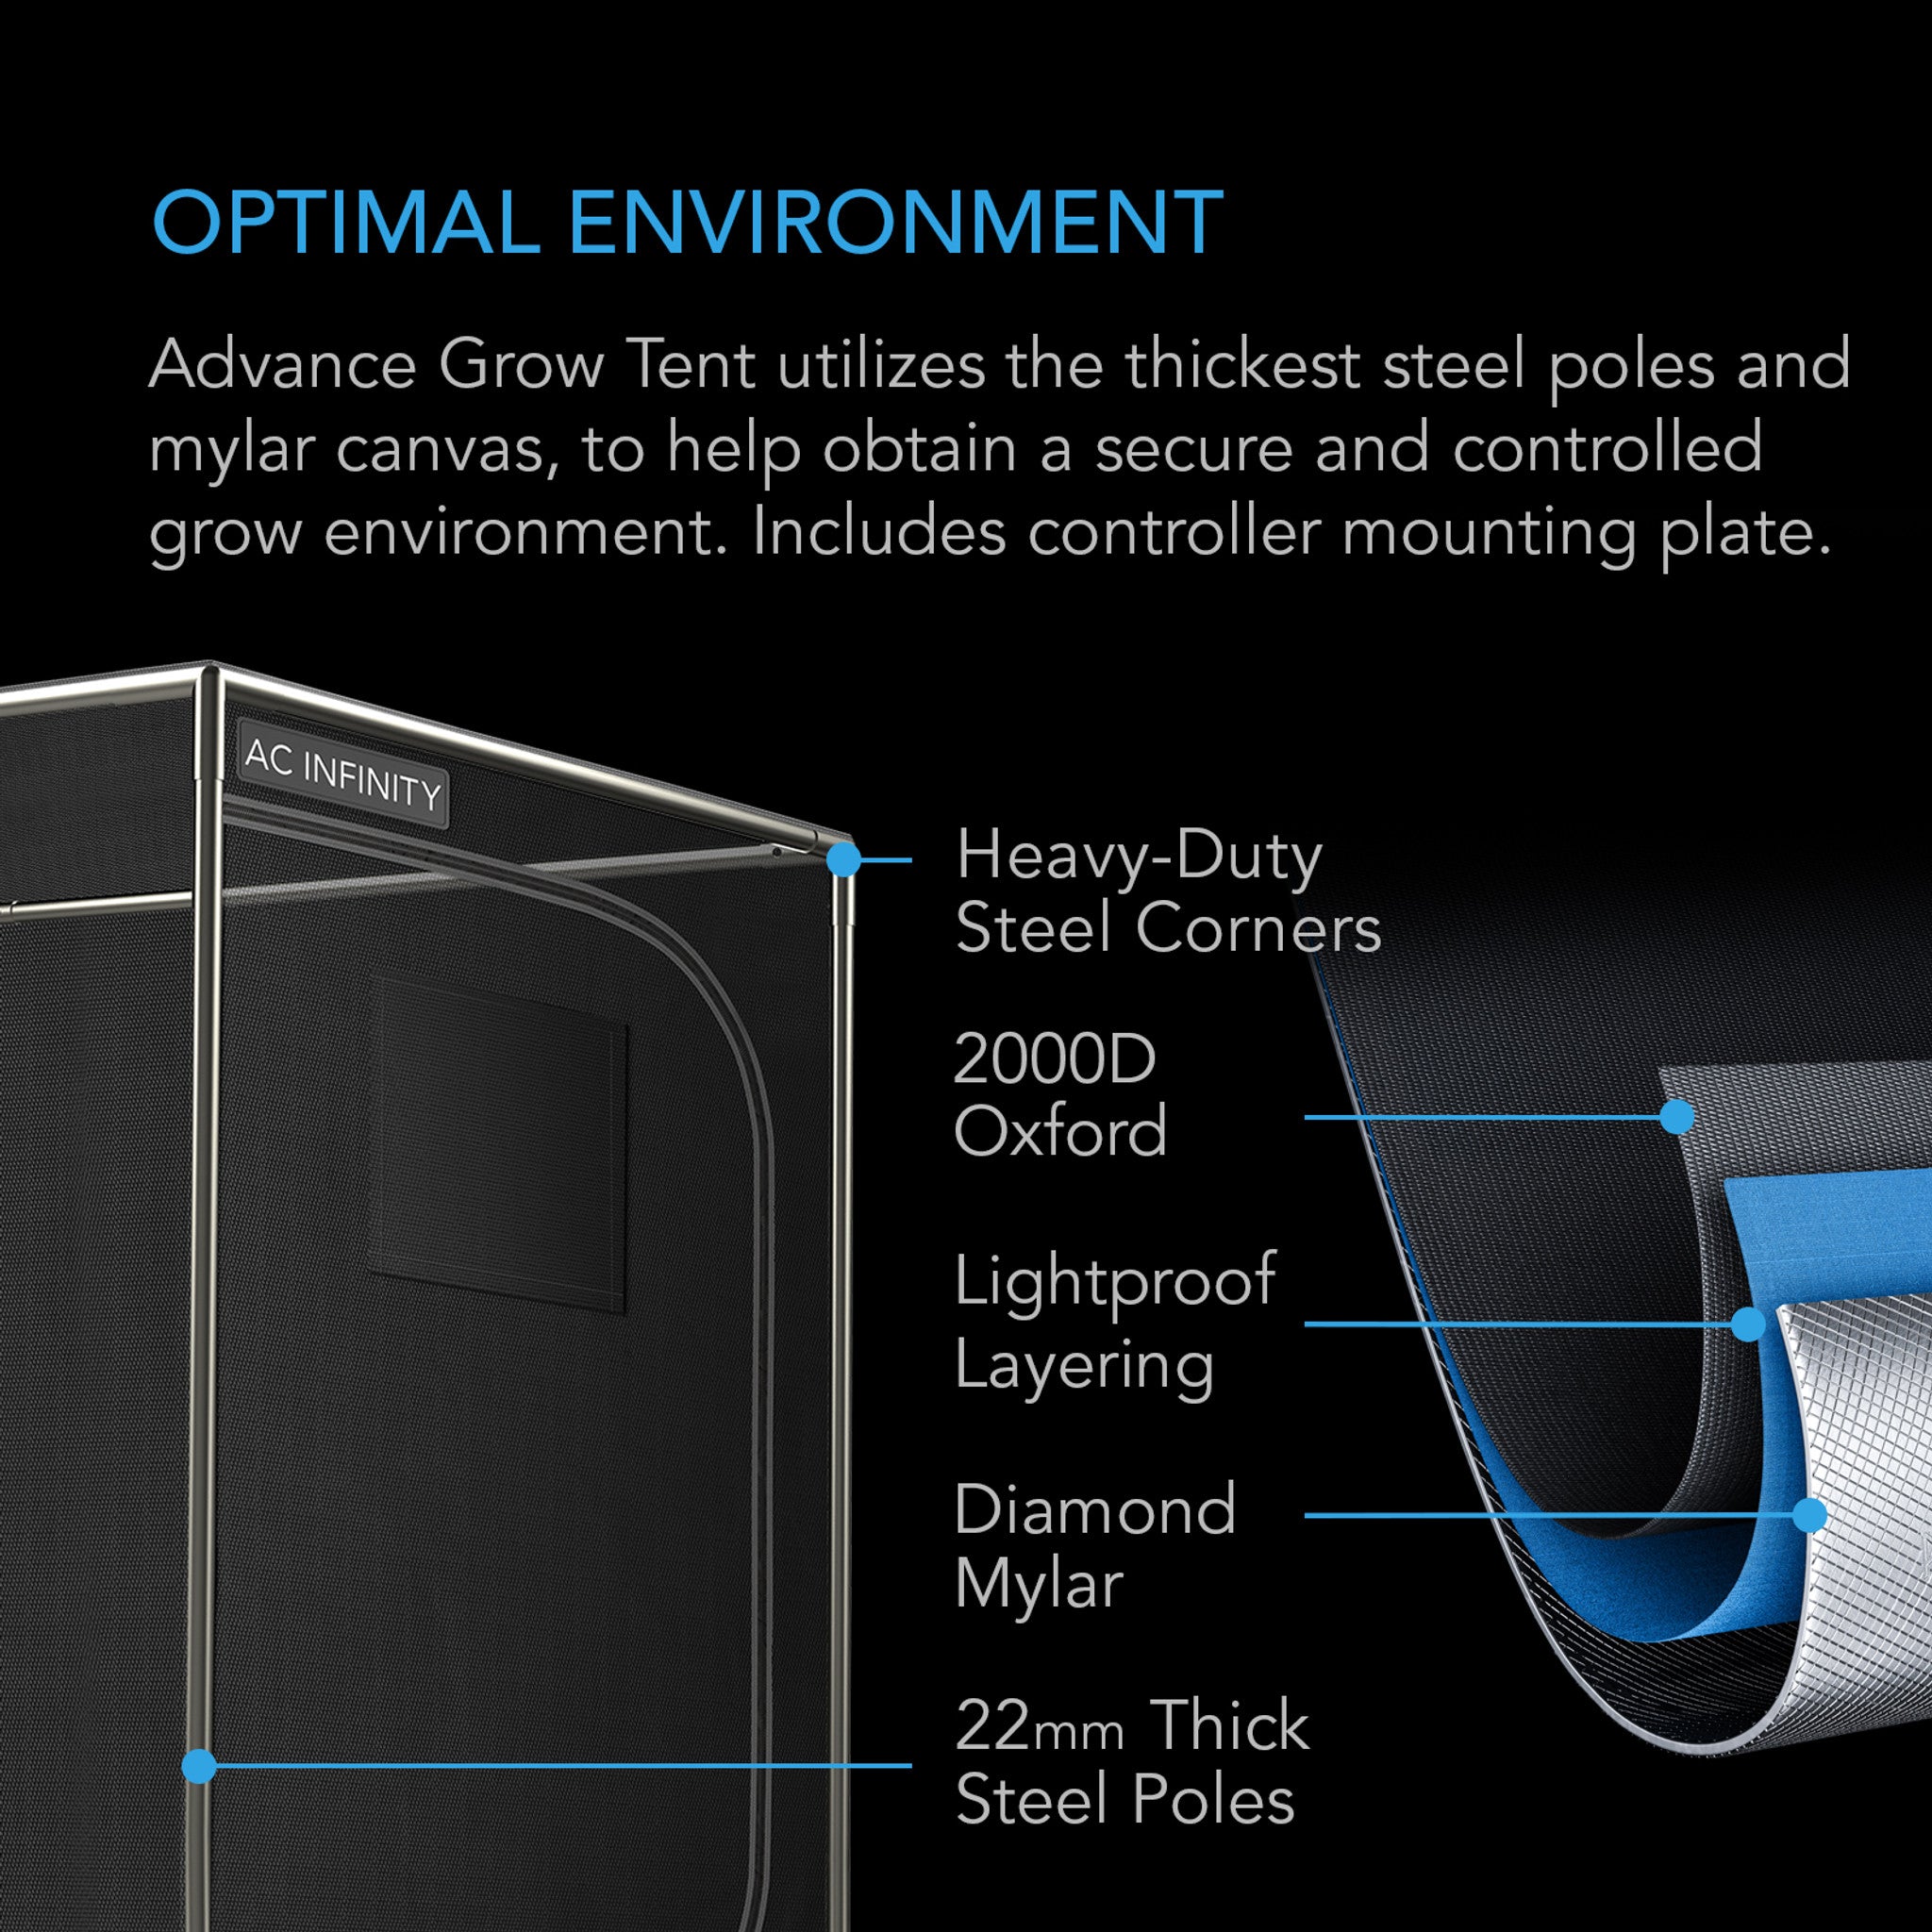 ADVANCE GROW TENT SYSTEM PRO 5X5, 6-PLANT KIT, WIFI-INTEGRATED CONTROLS TO AUTOMATE VENTILATION, CIRCULATION, FULL SPECTRUM LM301H EVO LED GROW LIGHT